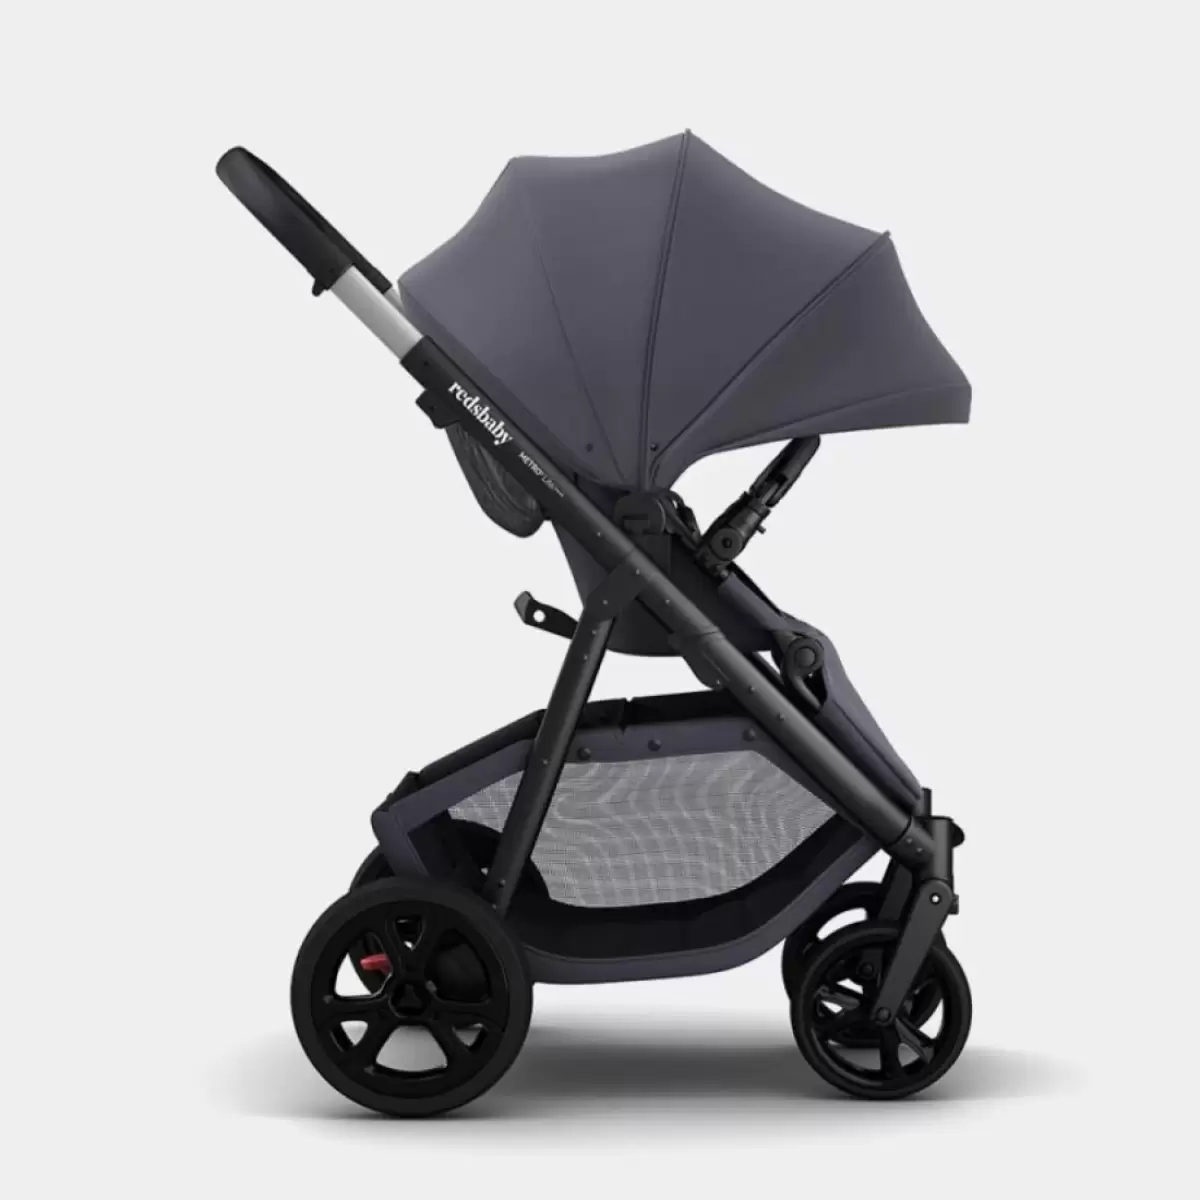 7 Reasons The Brand New Redsbaby Metro Lite Stroller Is The Pram For You 6